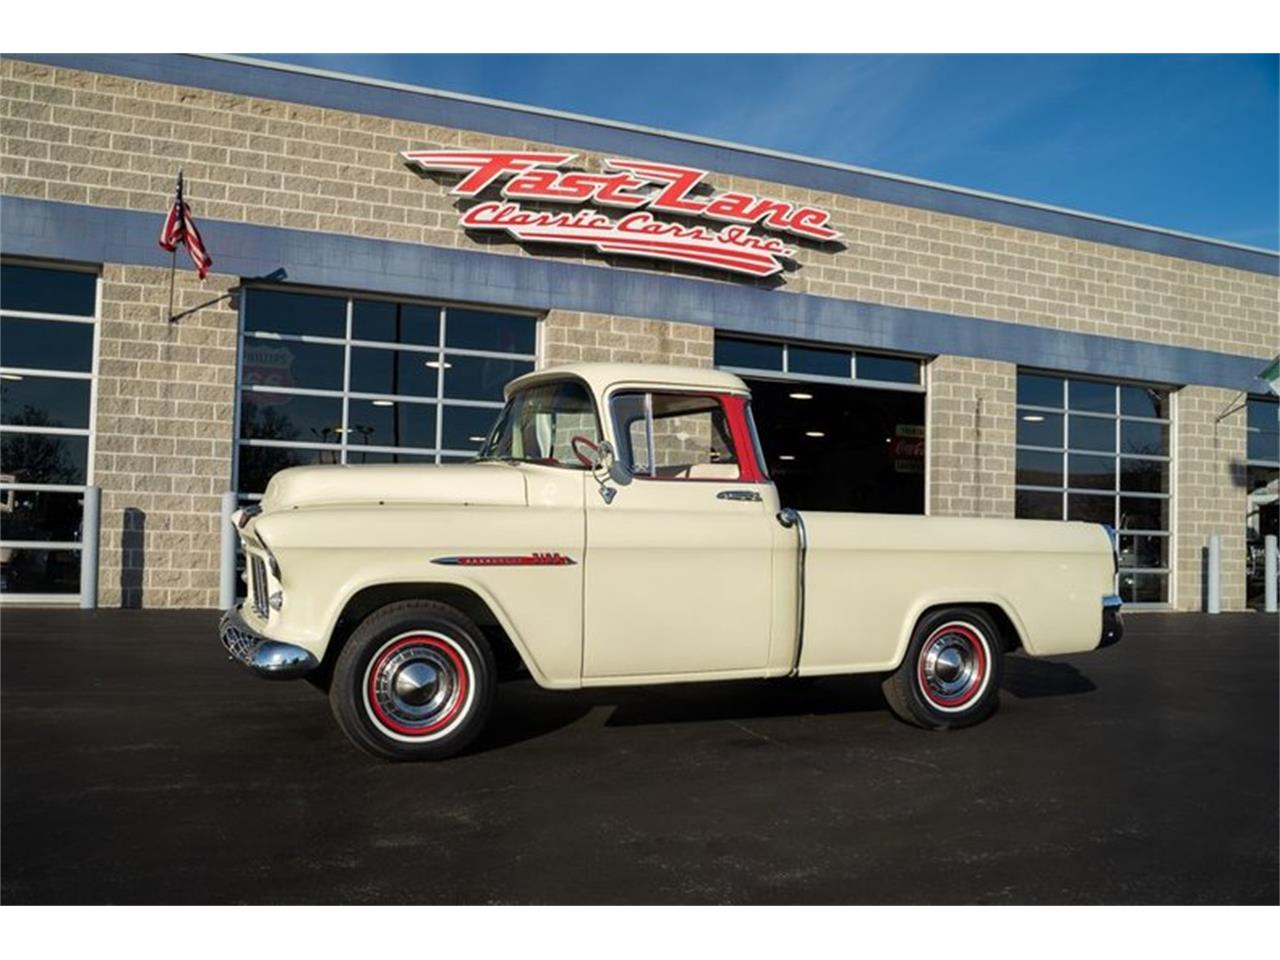 For Sale: 1955 Chevrolet Cameo in St. Charles, Missouri for sale in Saint Charles, MO